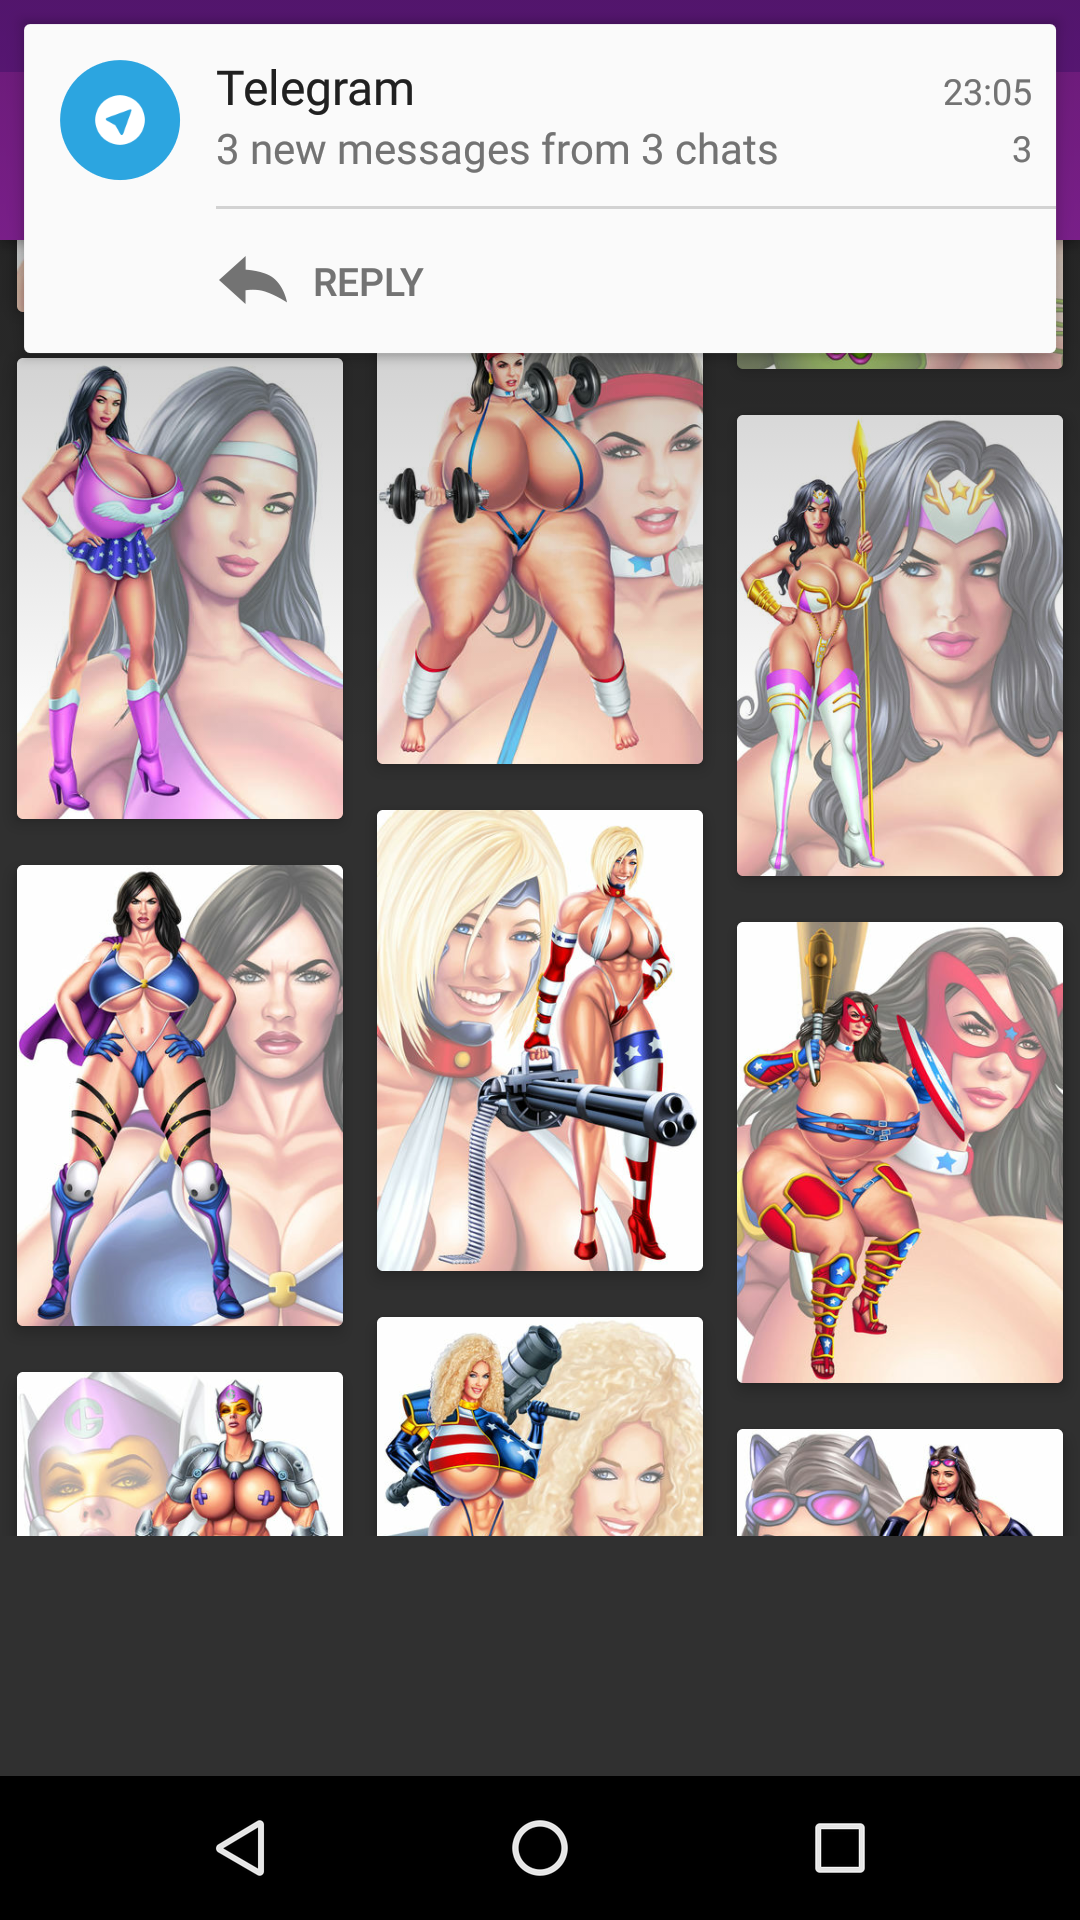 Superheroines hantai,rated,pornstar,porn,superheroines,hentai,gallery,anime,image,aplikasi,apps,applications,picture,android,panties,hot,манга,excuses,wallpaper,sexy,comics,photo,for,watching,страпон,collection